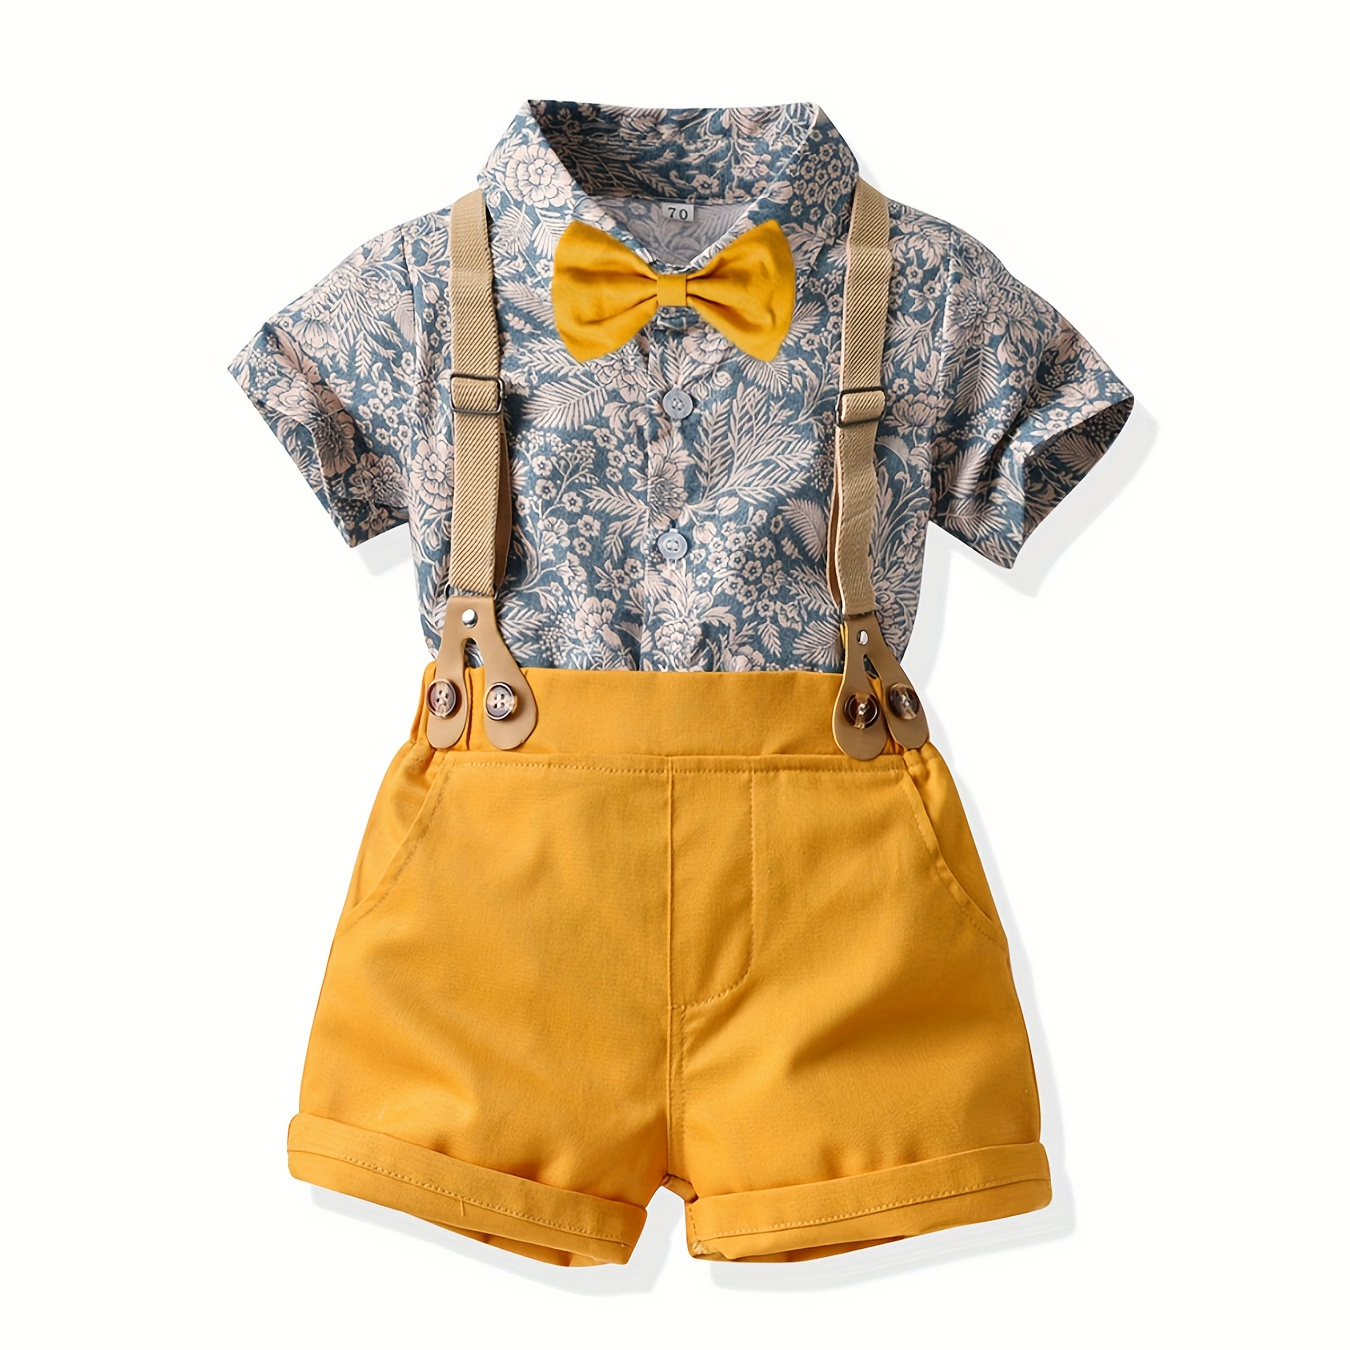 

Baby Boys' 2-piece Cotton Outfit Set, Casual Short Sleeve Printed Shirt With Bowtie And Suspender Shorts, Beach Style Summer Wear